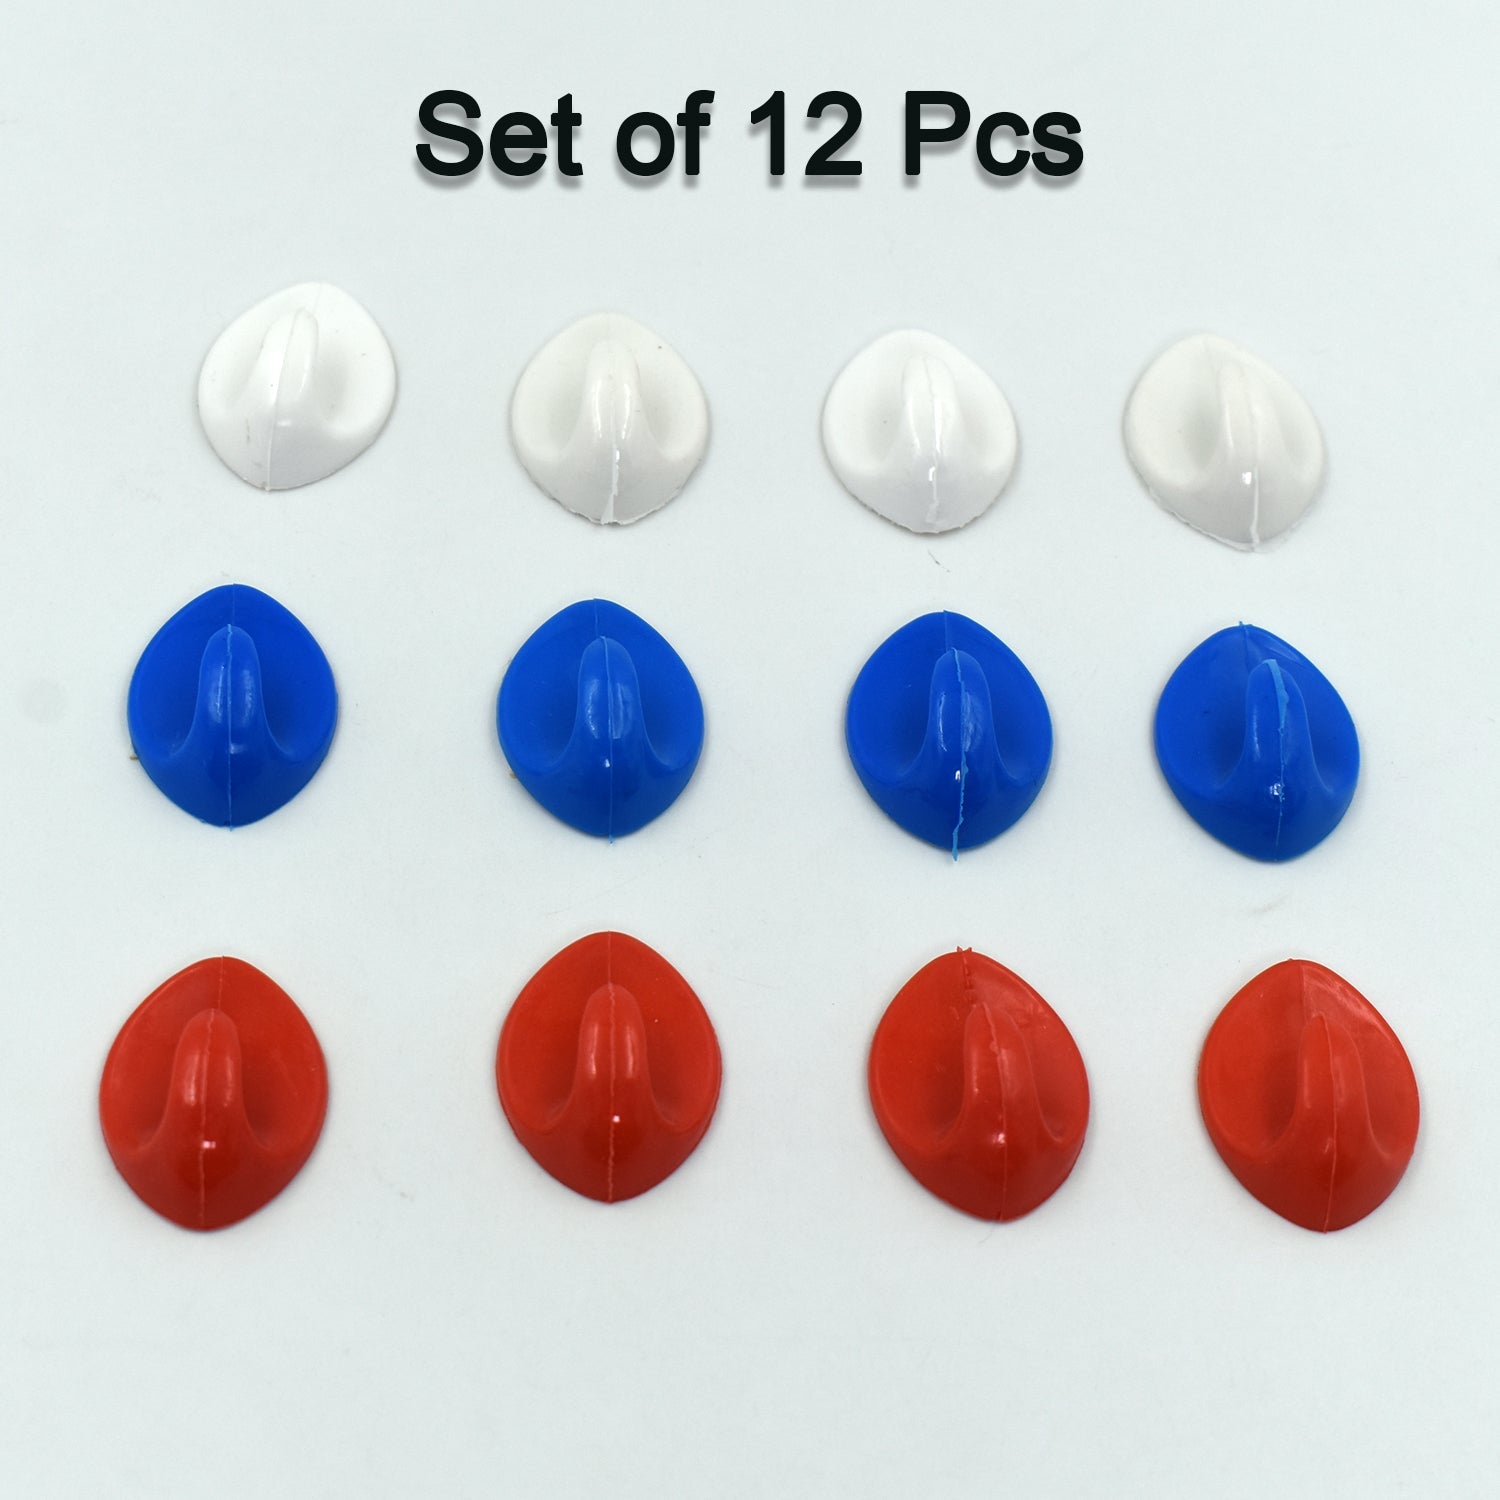 4842 12Pc Plastic Adhesive Hooks For Placing On Wall Surfaces In Order To Hang Various Stuffs And Items. DeoDap